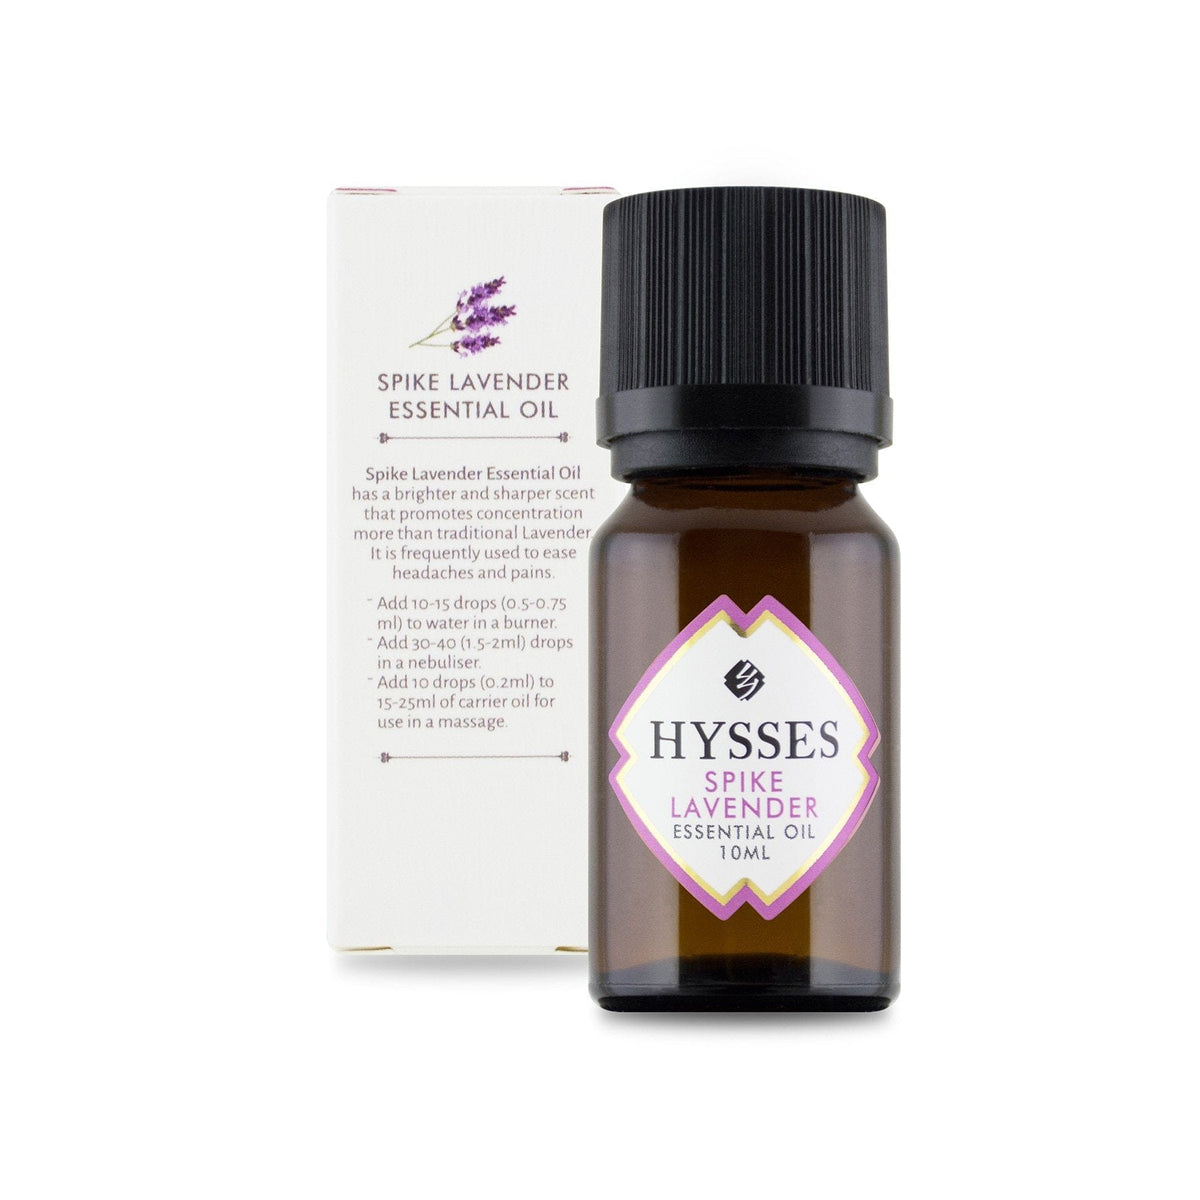 Hysses Essential Oil Essential Oil Spike Lavender